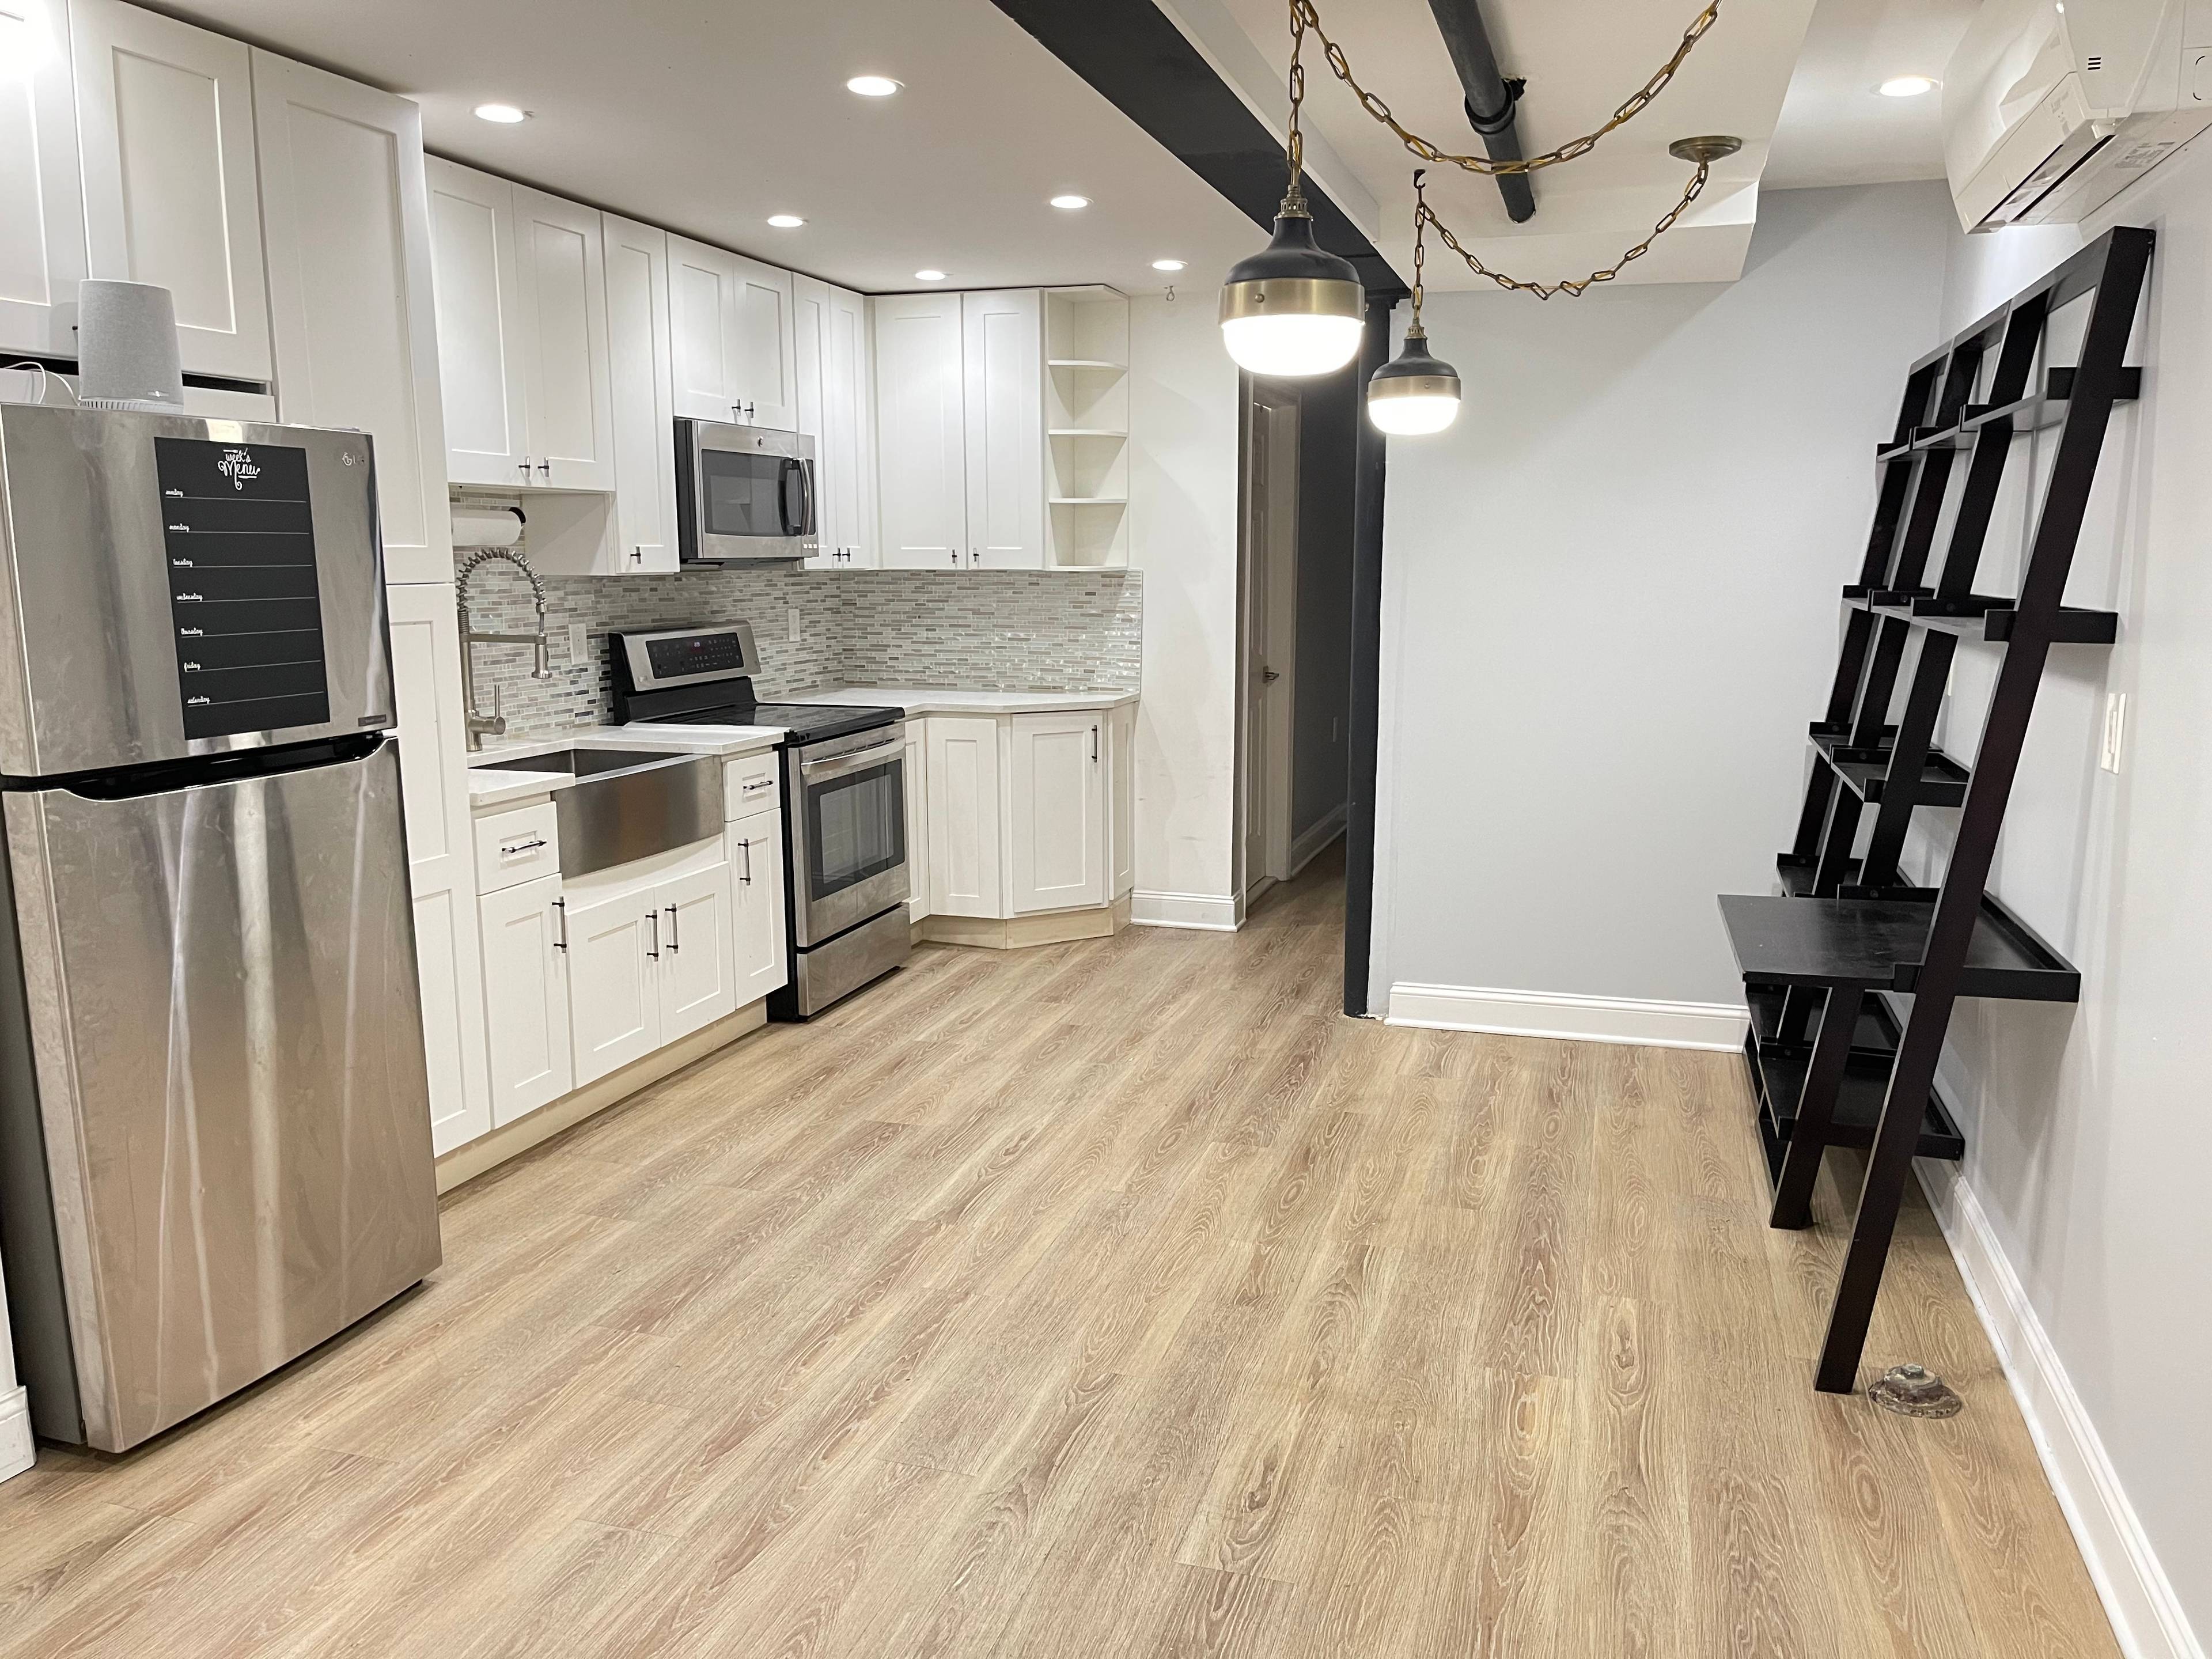 Introducing 3 bedroom duplex apartment located in the heart of Bushwick.